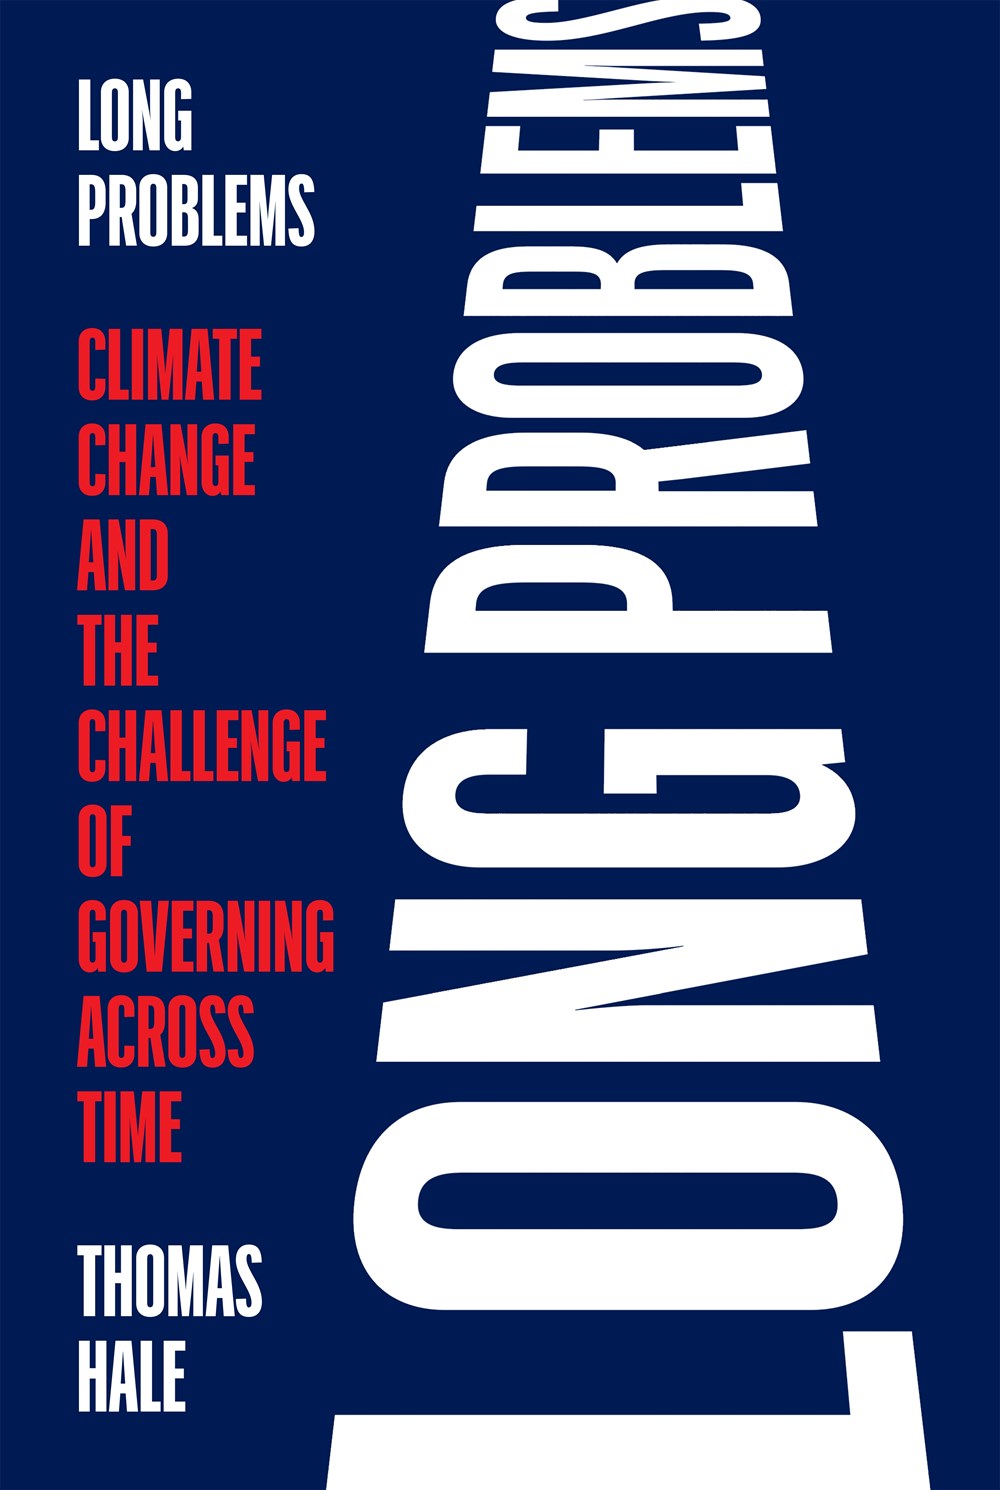 Long Problems: Climate Change and the Challenge of Governing Across Time